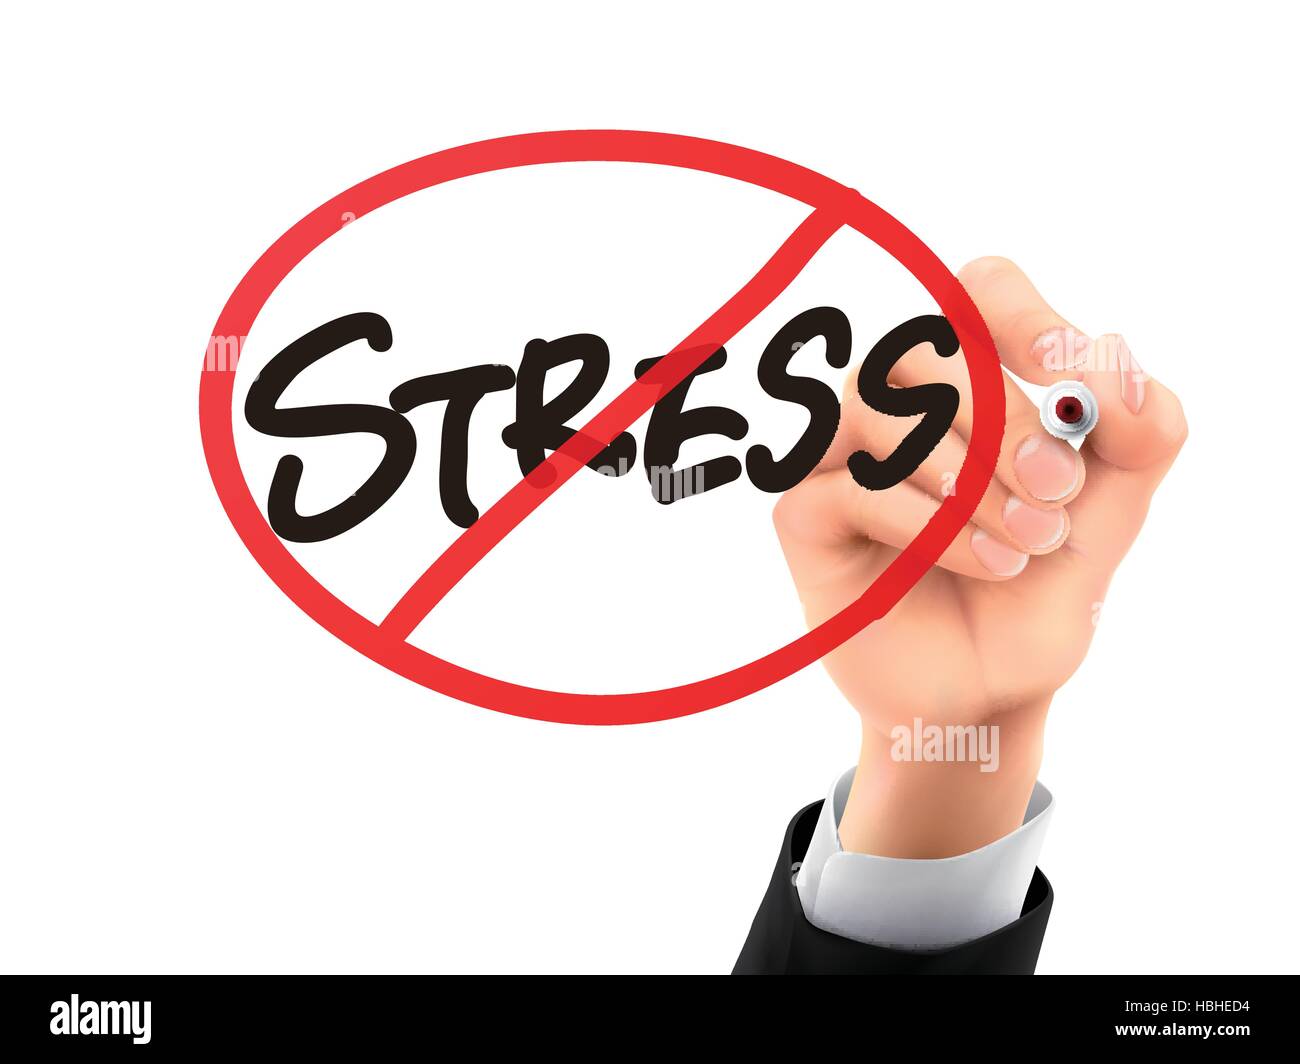 https://c8.alamy.com/comp/HBHED4/no-stress-words-written-by-hand-on-a-transparent-board-HBHED4.jpg